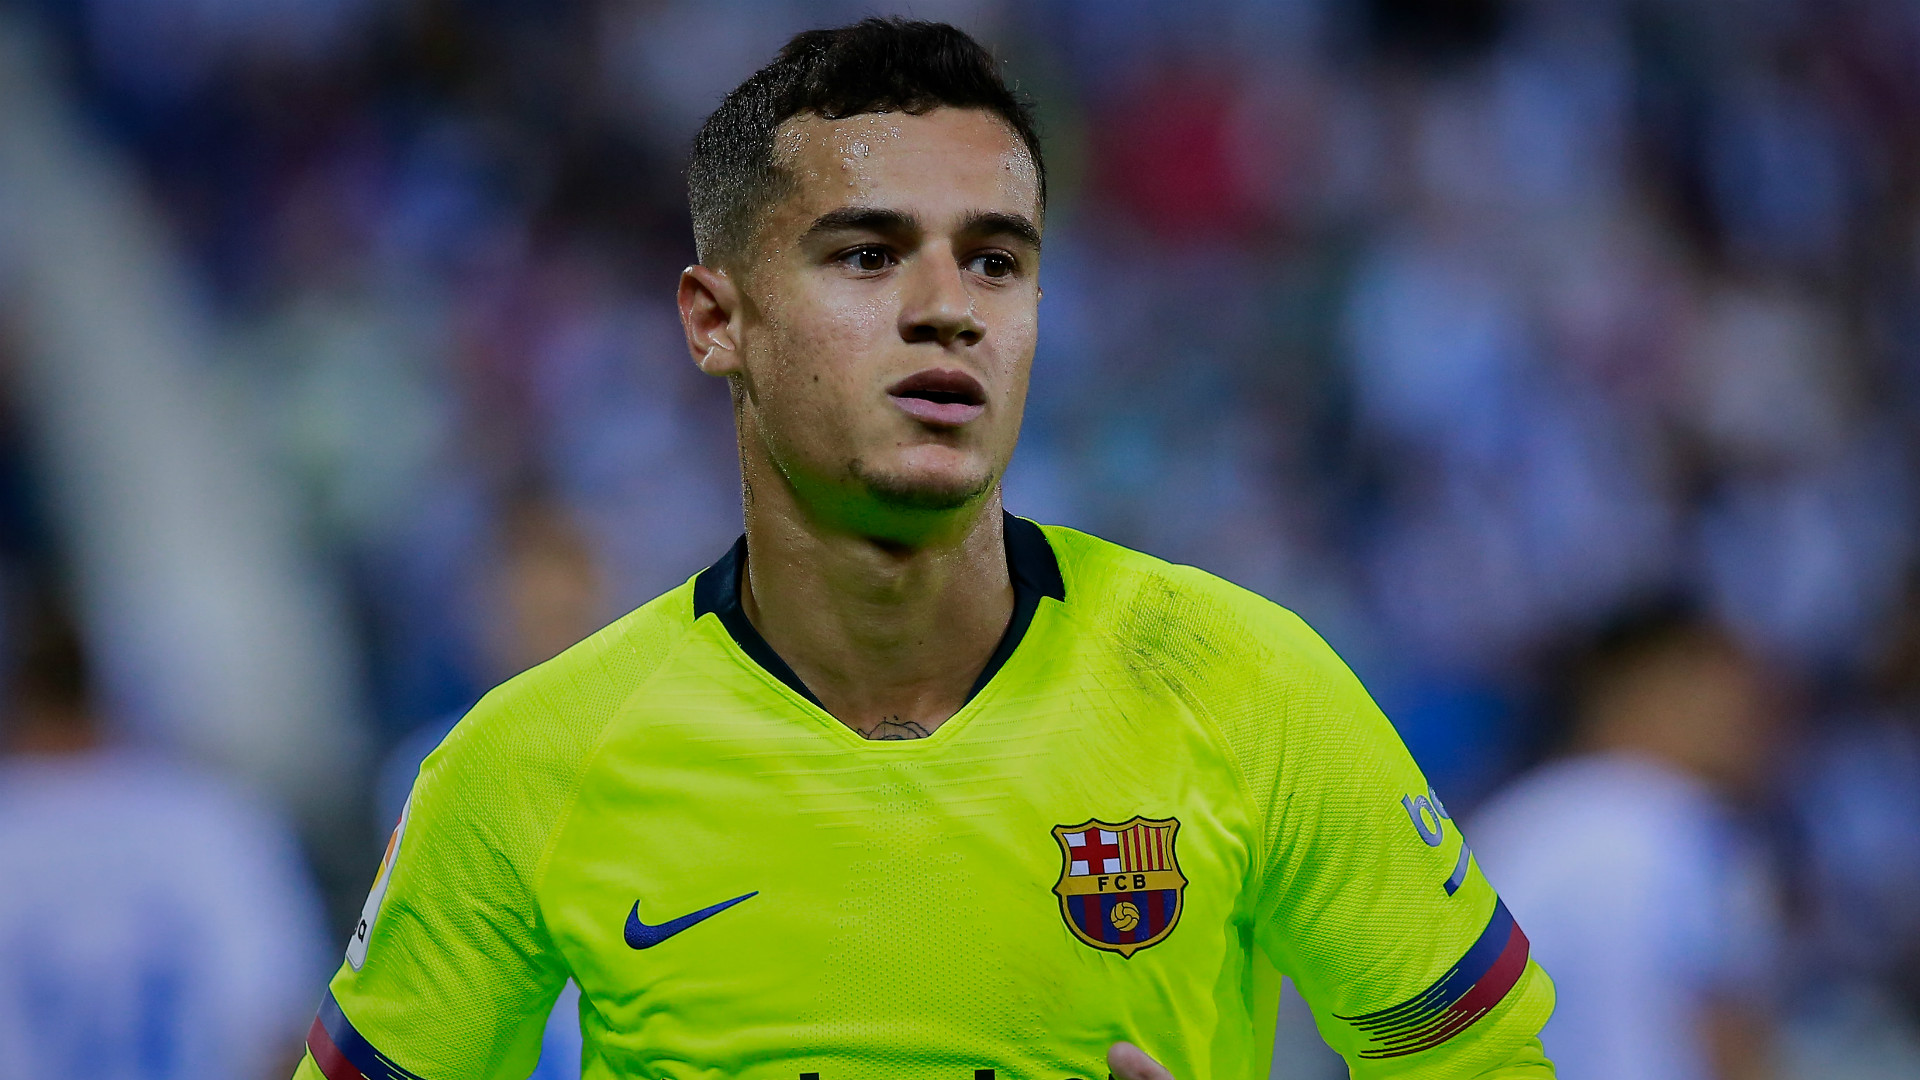 Liverpool could not afford Coutinho - Klopp - Sports Leo